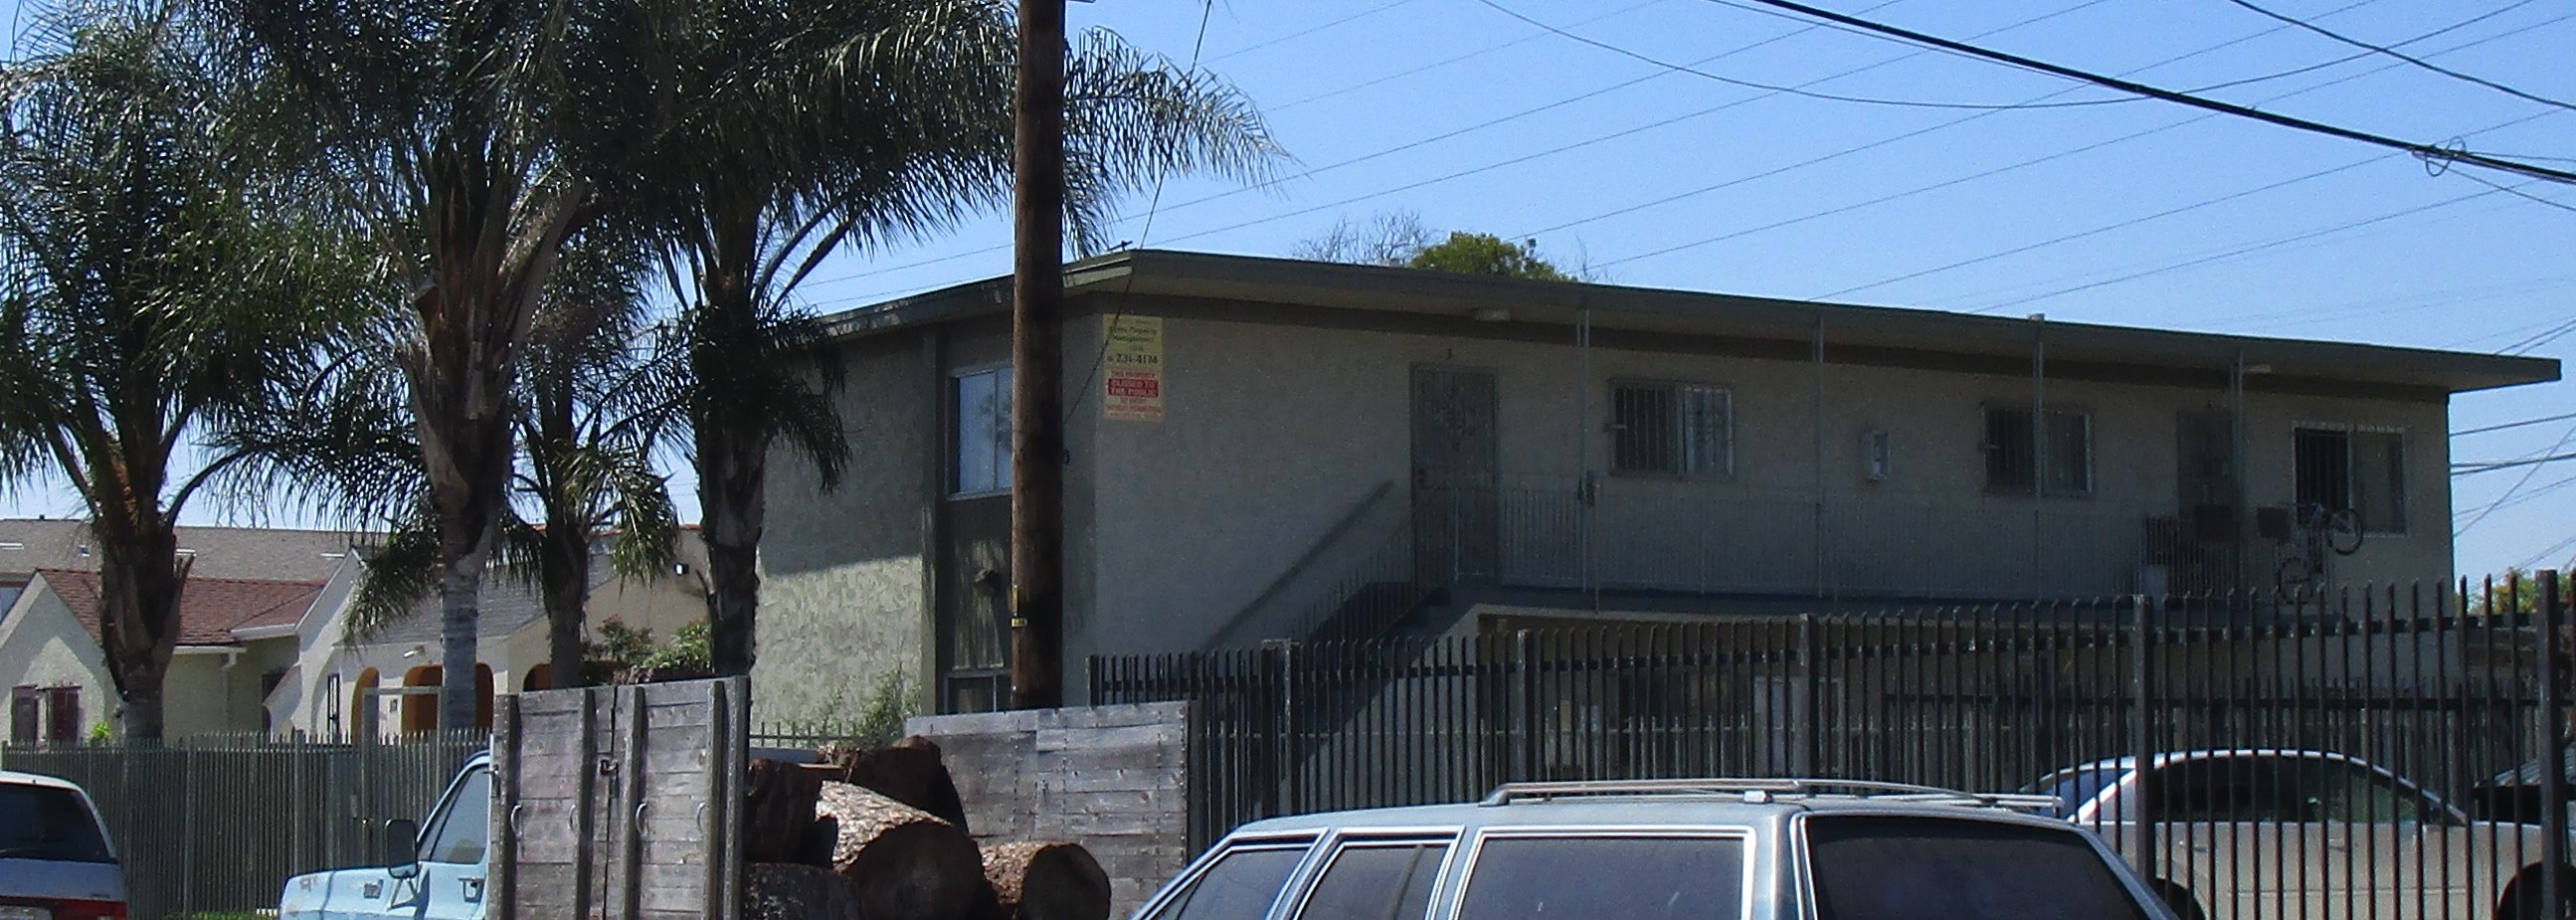 Street view of property showing a two story gated building with palm trees along the front